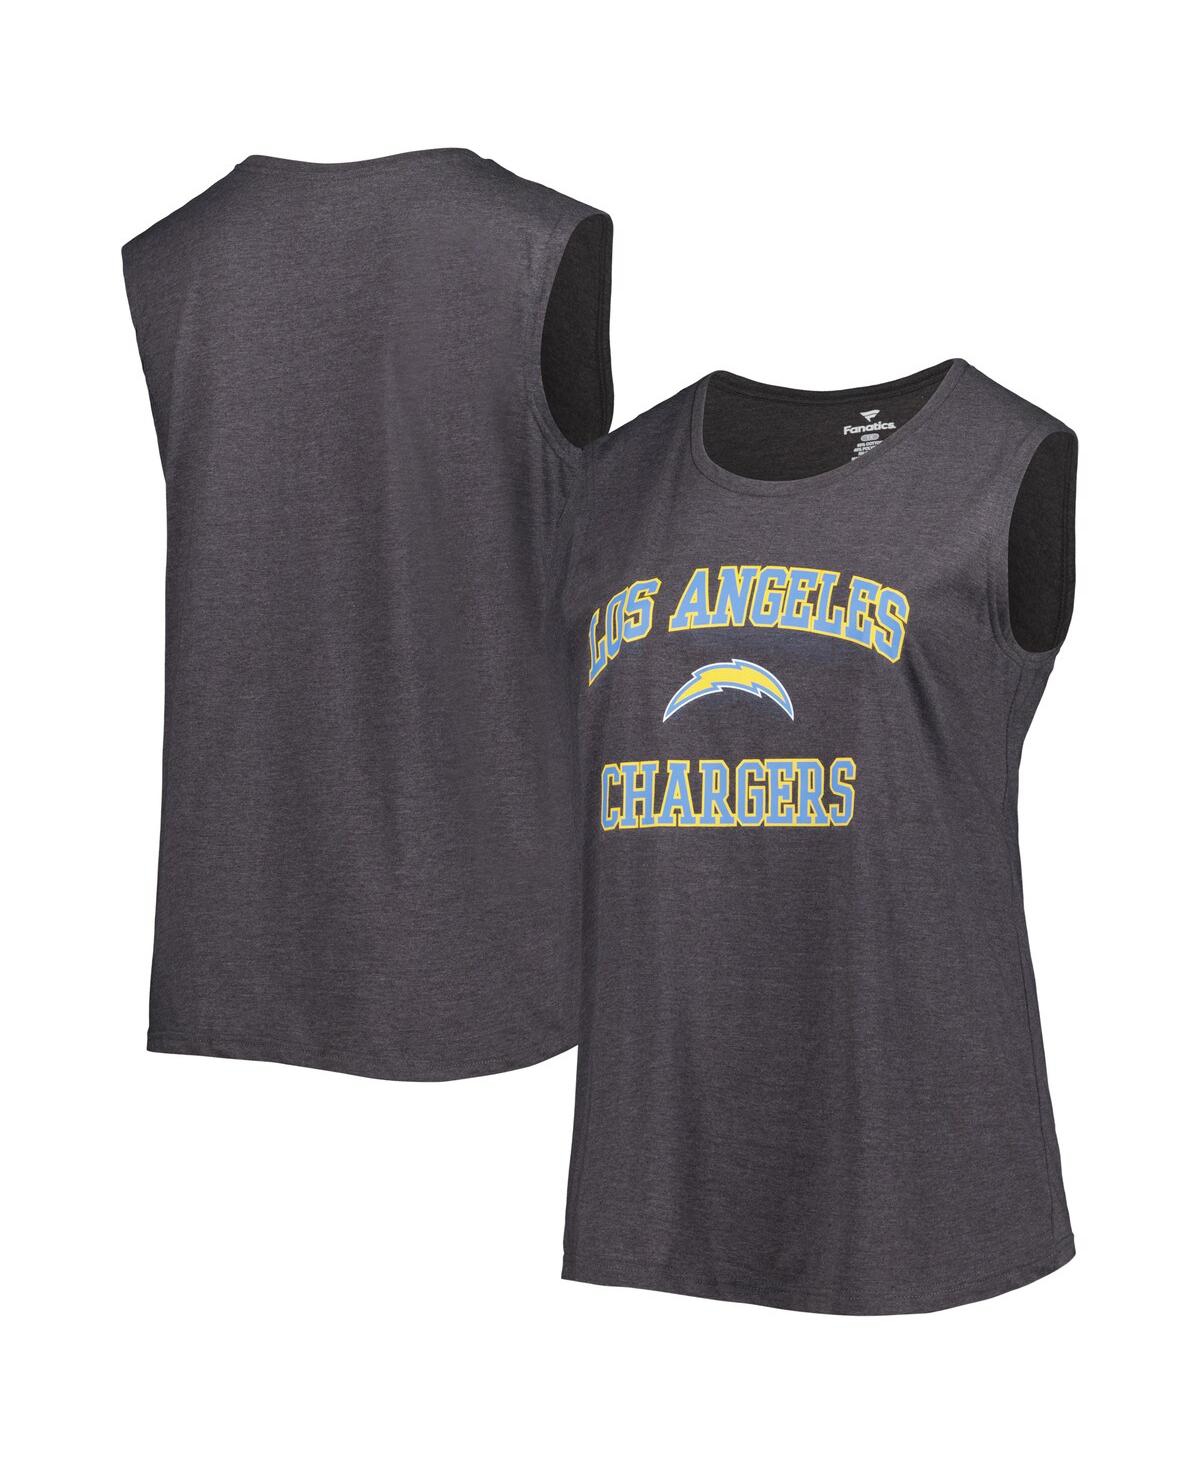 Fanatics Women's  Heather Charcoal Los Angeles Chargers Plus Size Tank Top